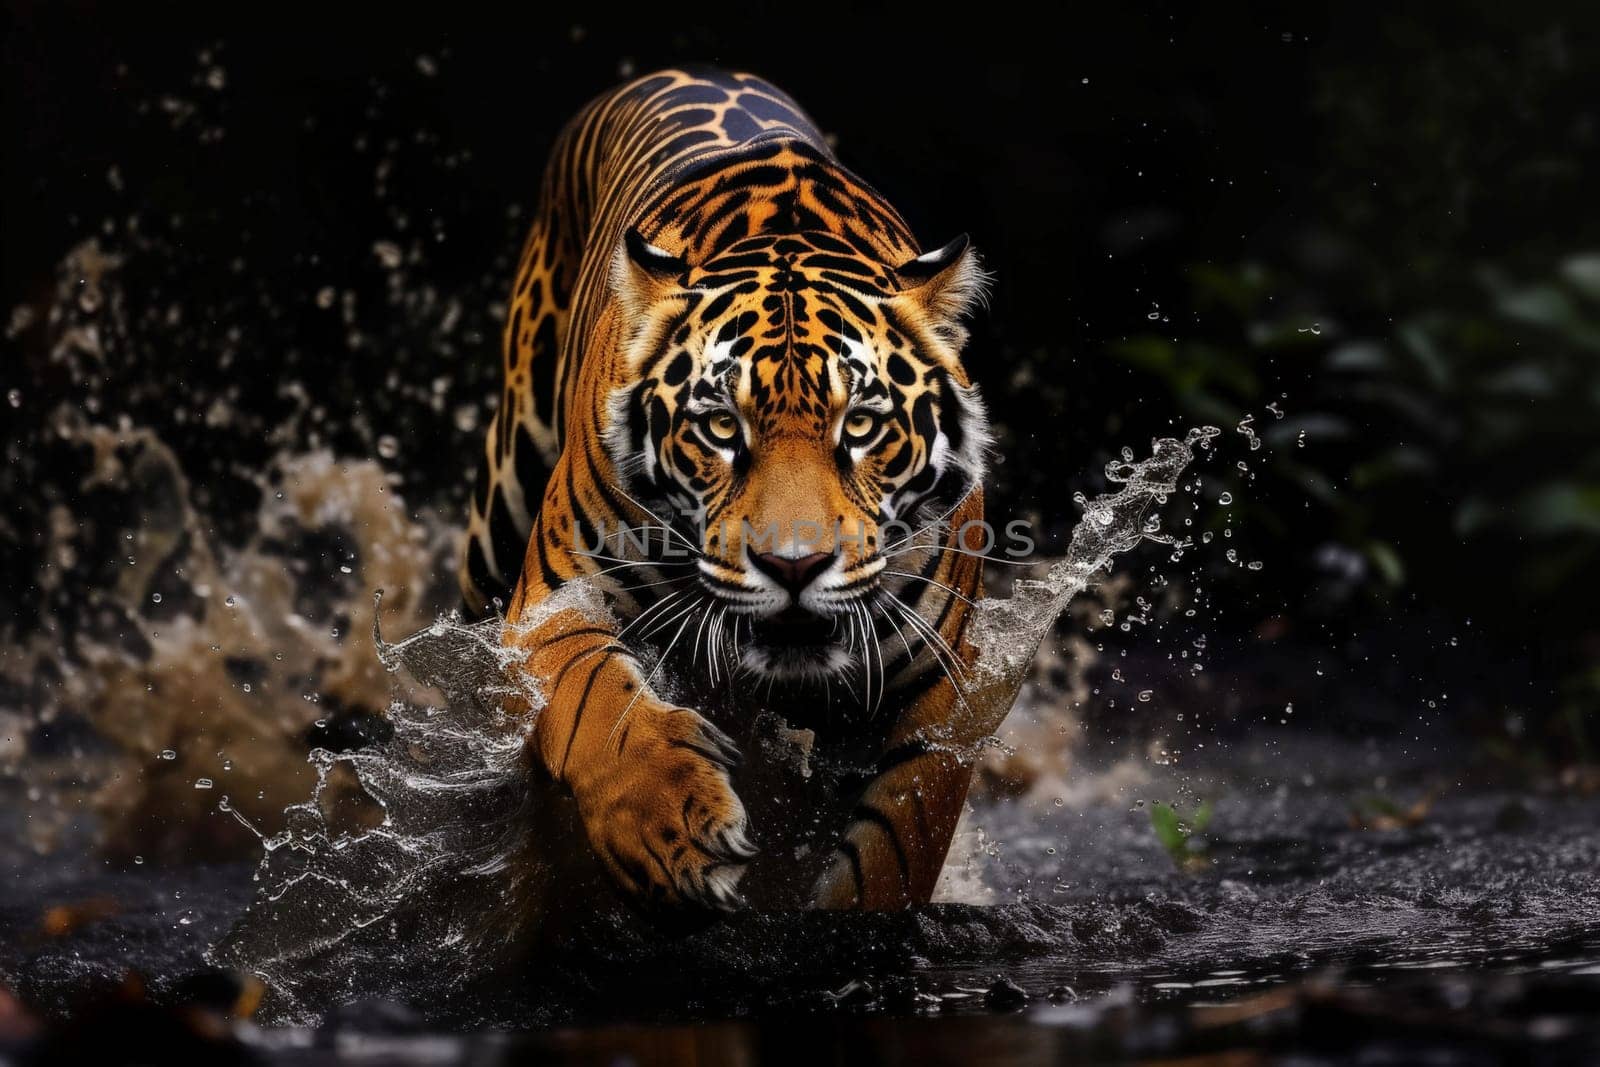 a close up of a tiger in the water with a splash of water on it's face and it's face..